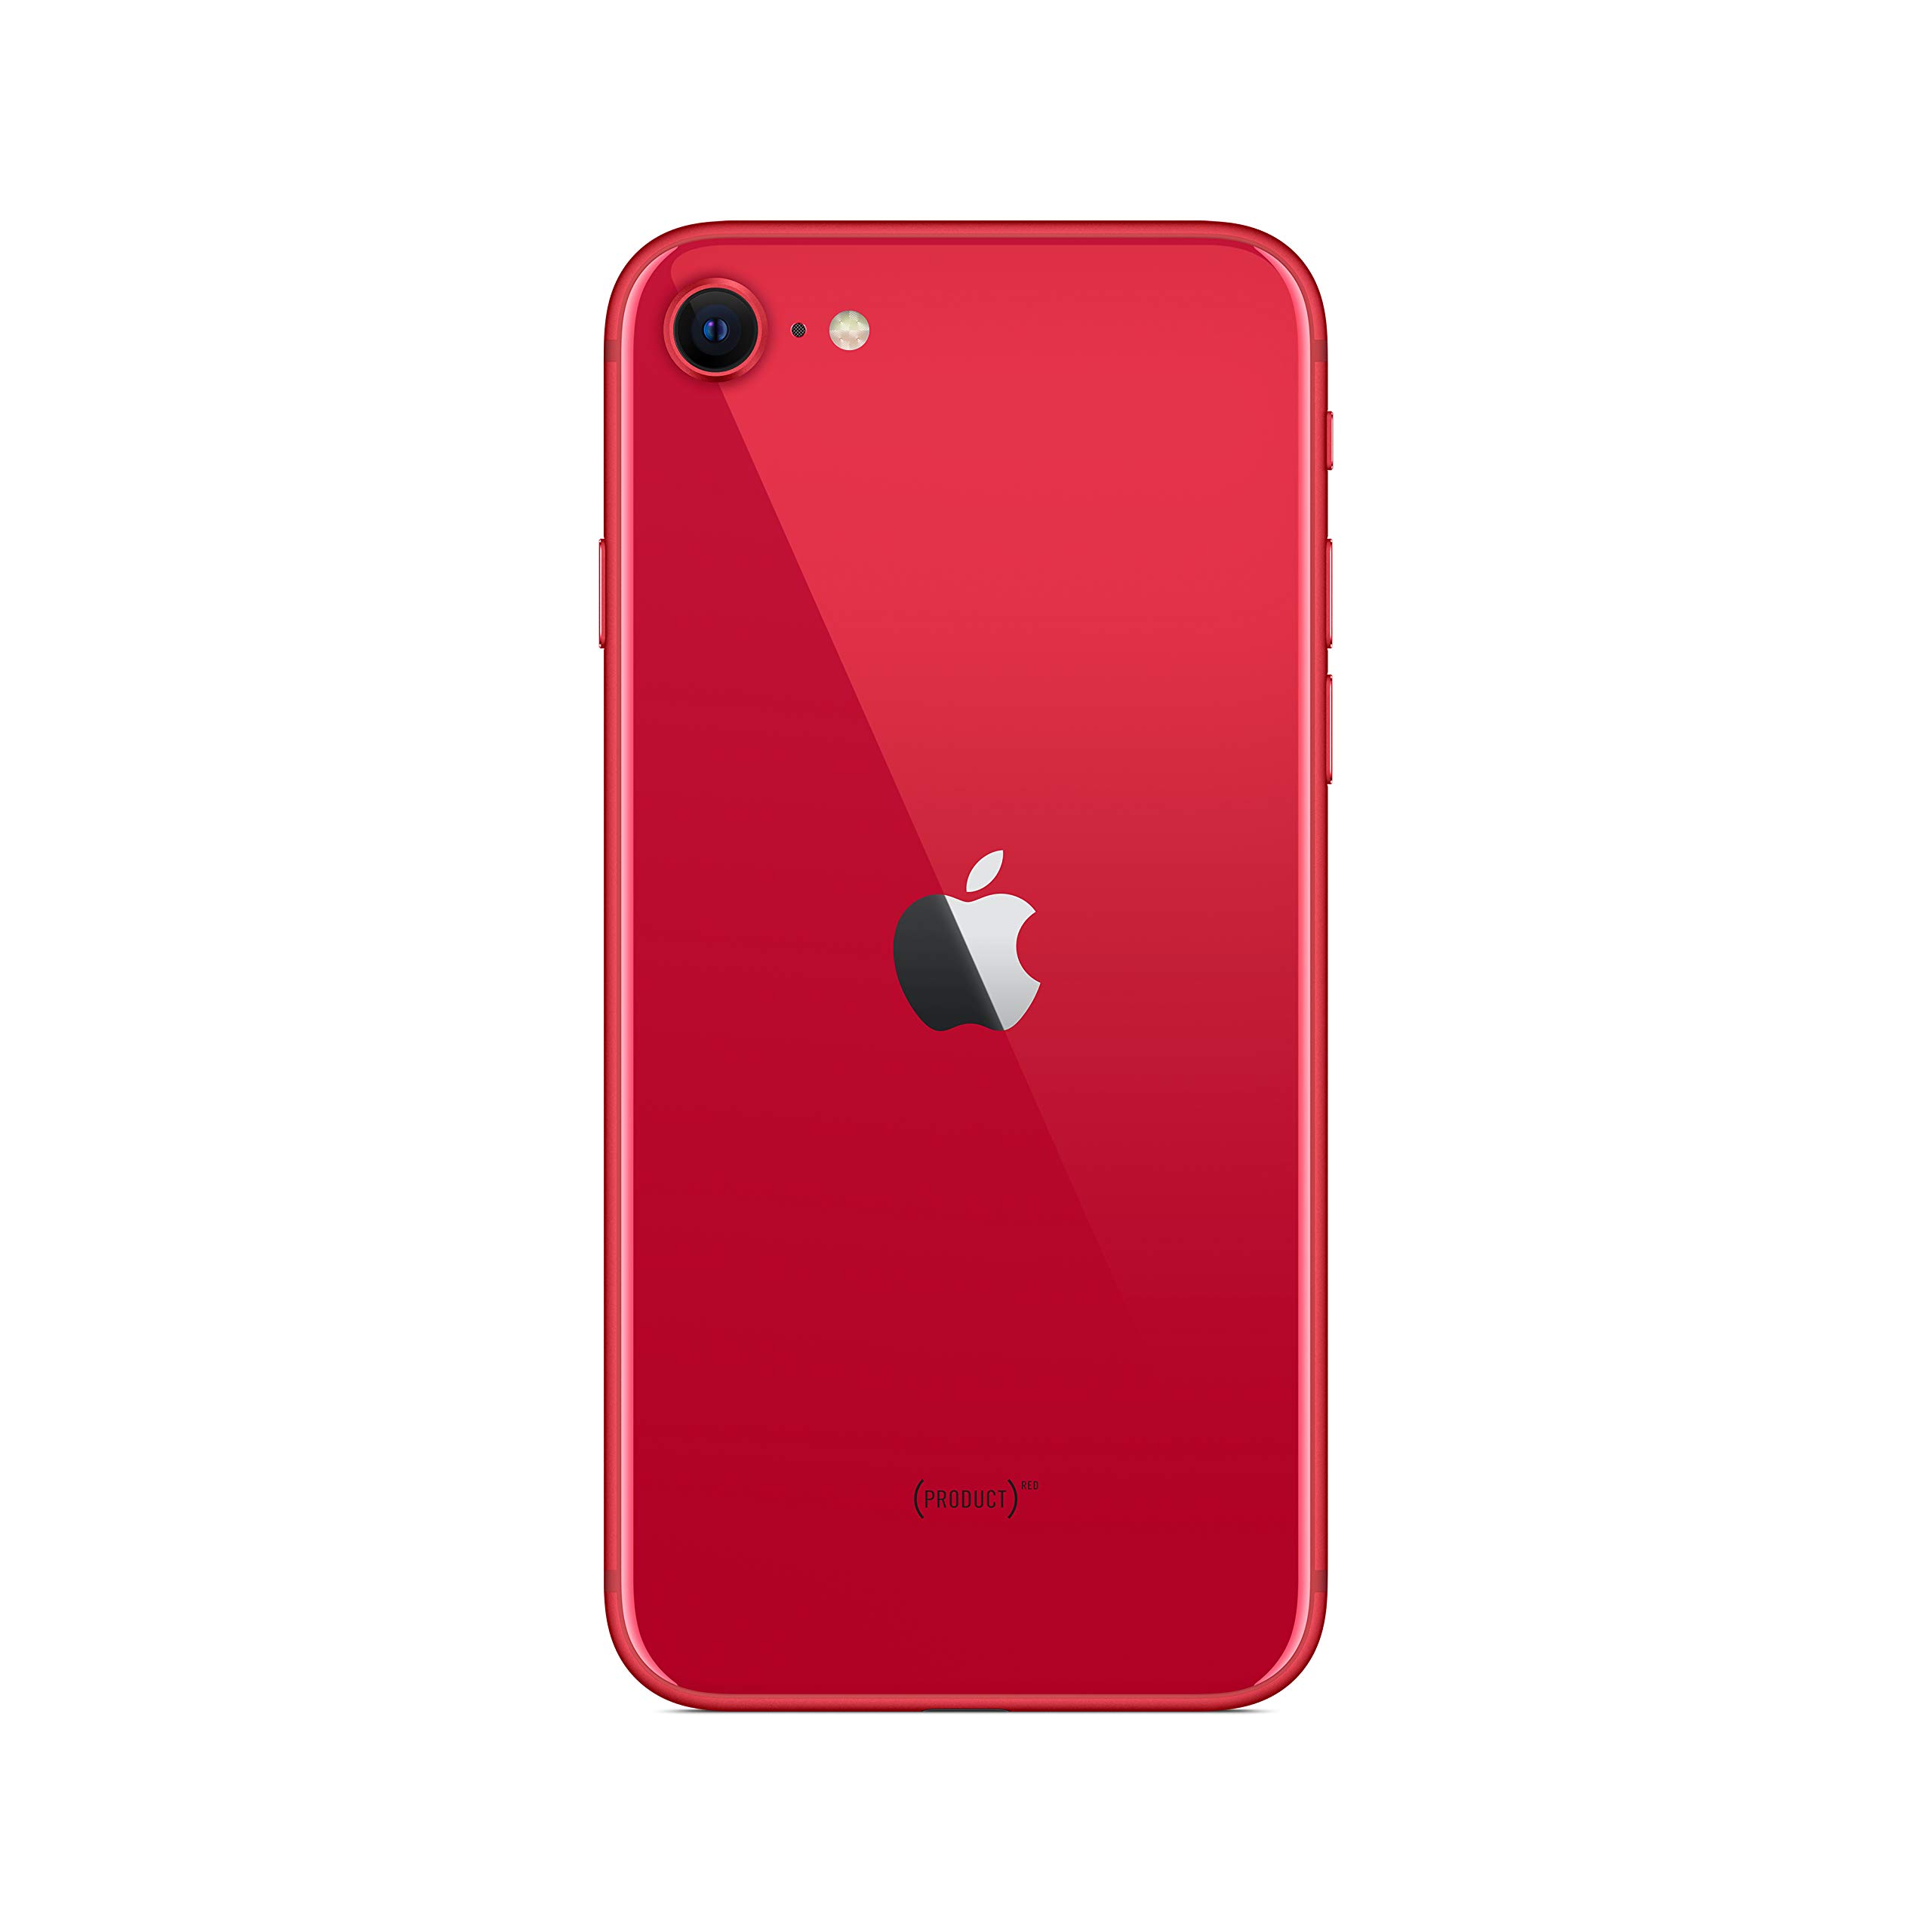 New Simple Mobile Prepaid - Apple iPhone SE (64GB) - (Product) RED [Locked to Carrier - Simple Mobile]